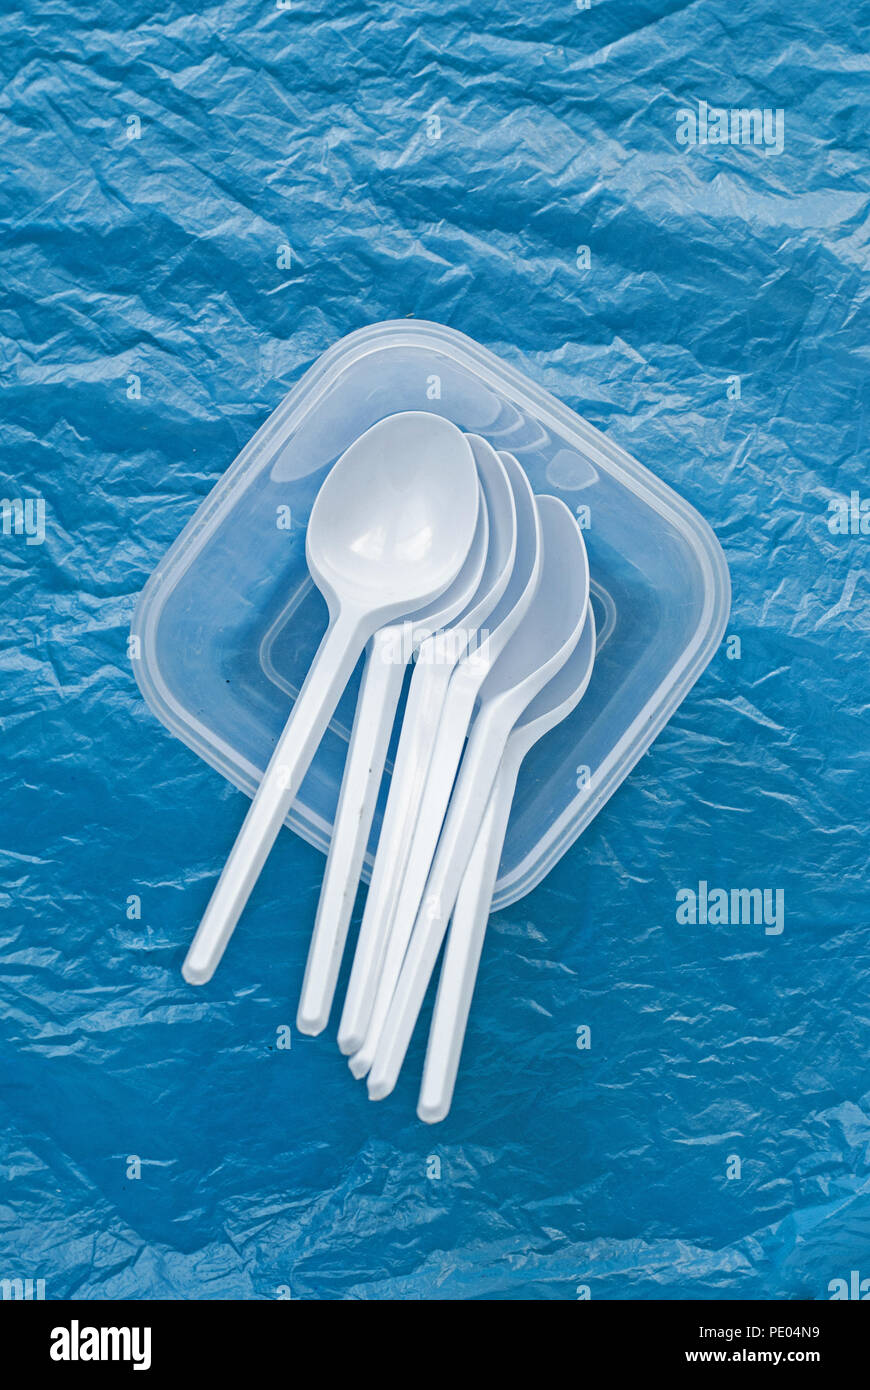 set of white plastic spoons in a plastic container on a blue plastic bag Stock Photo